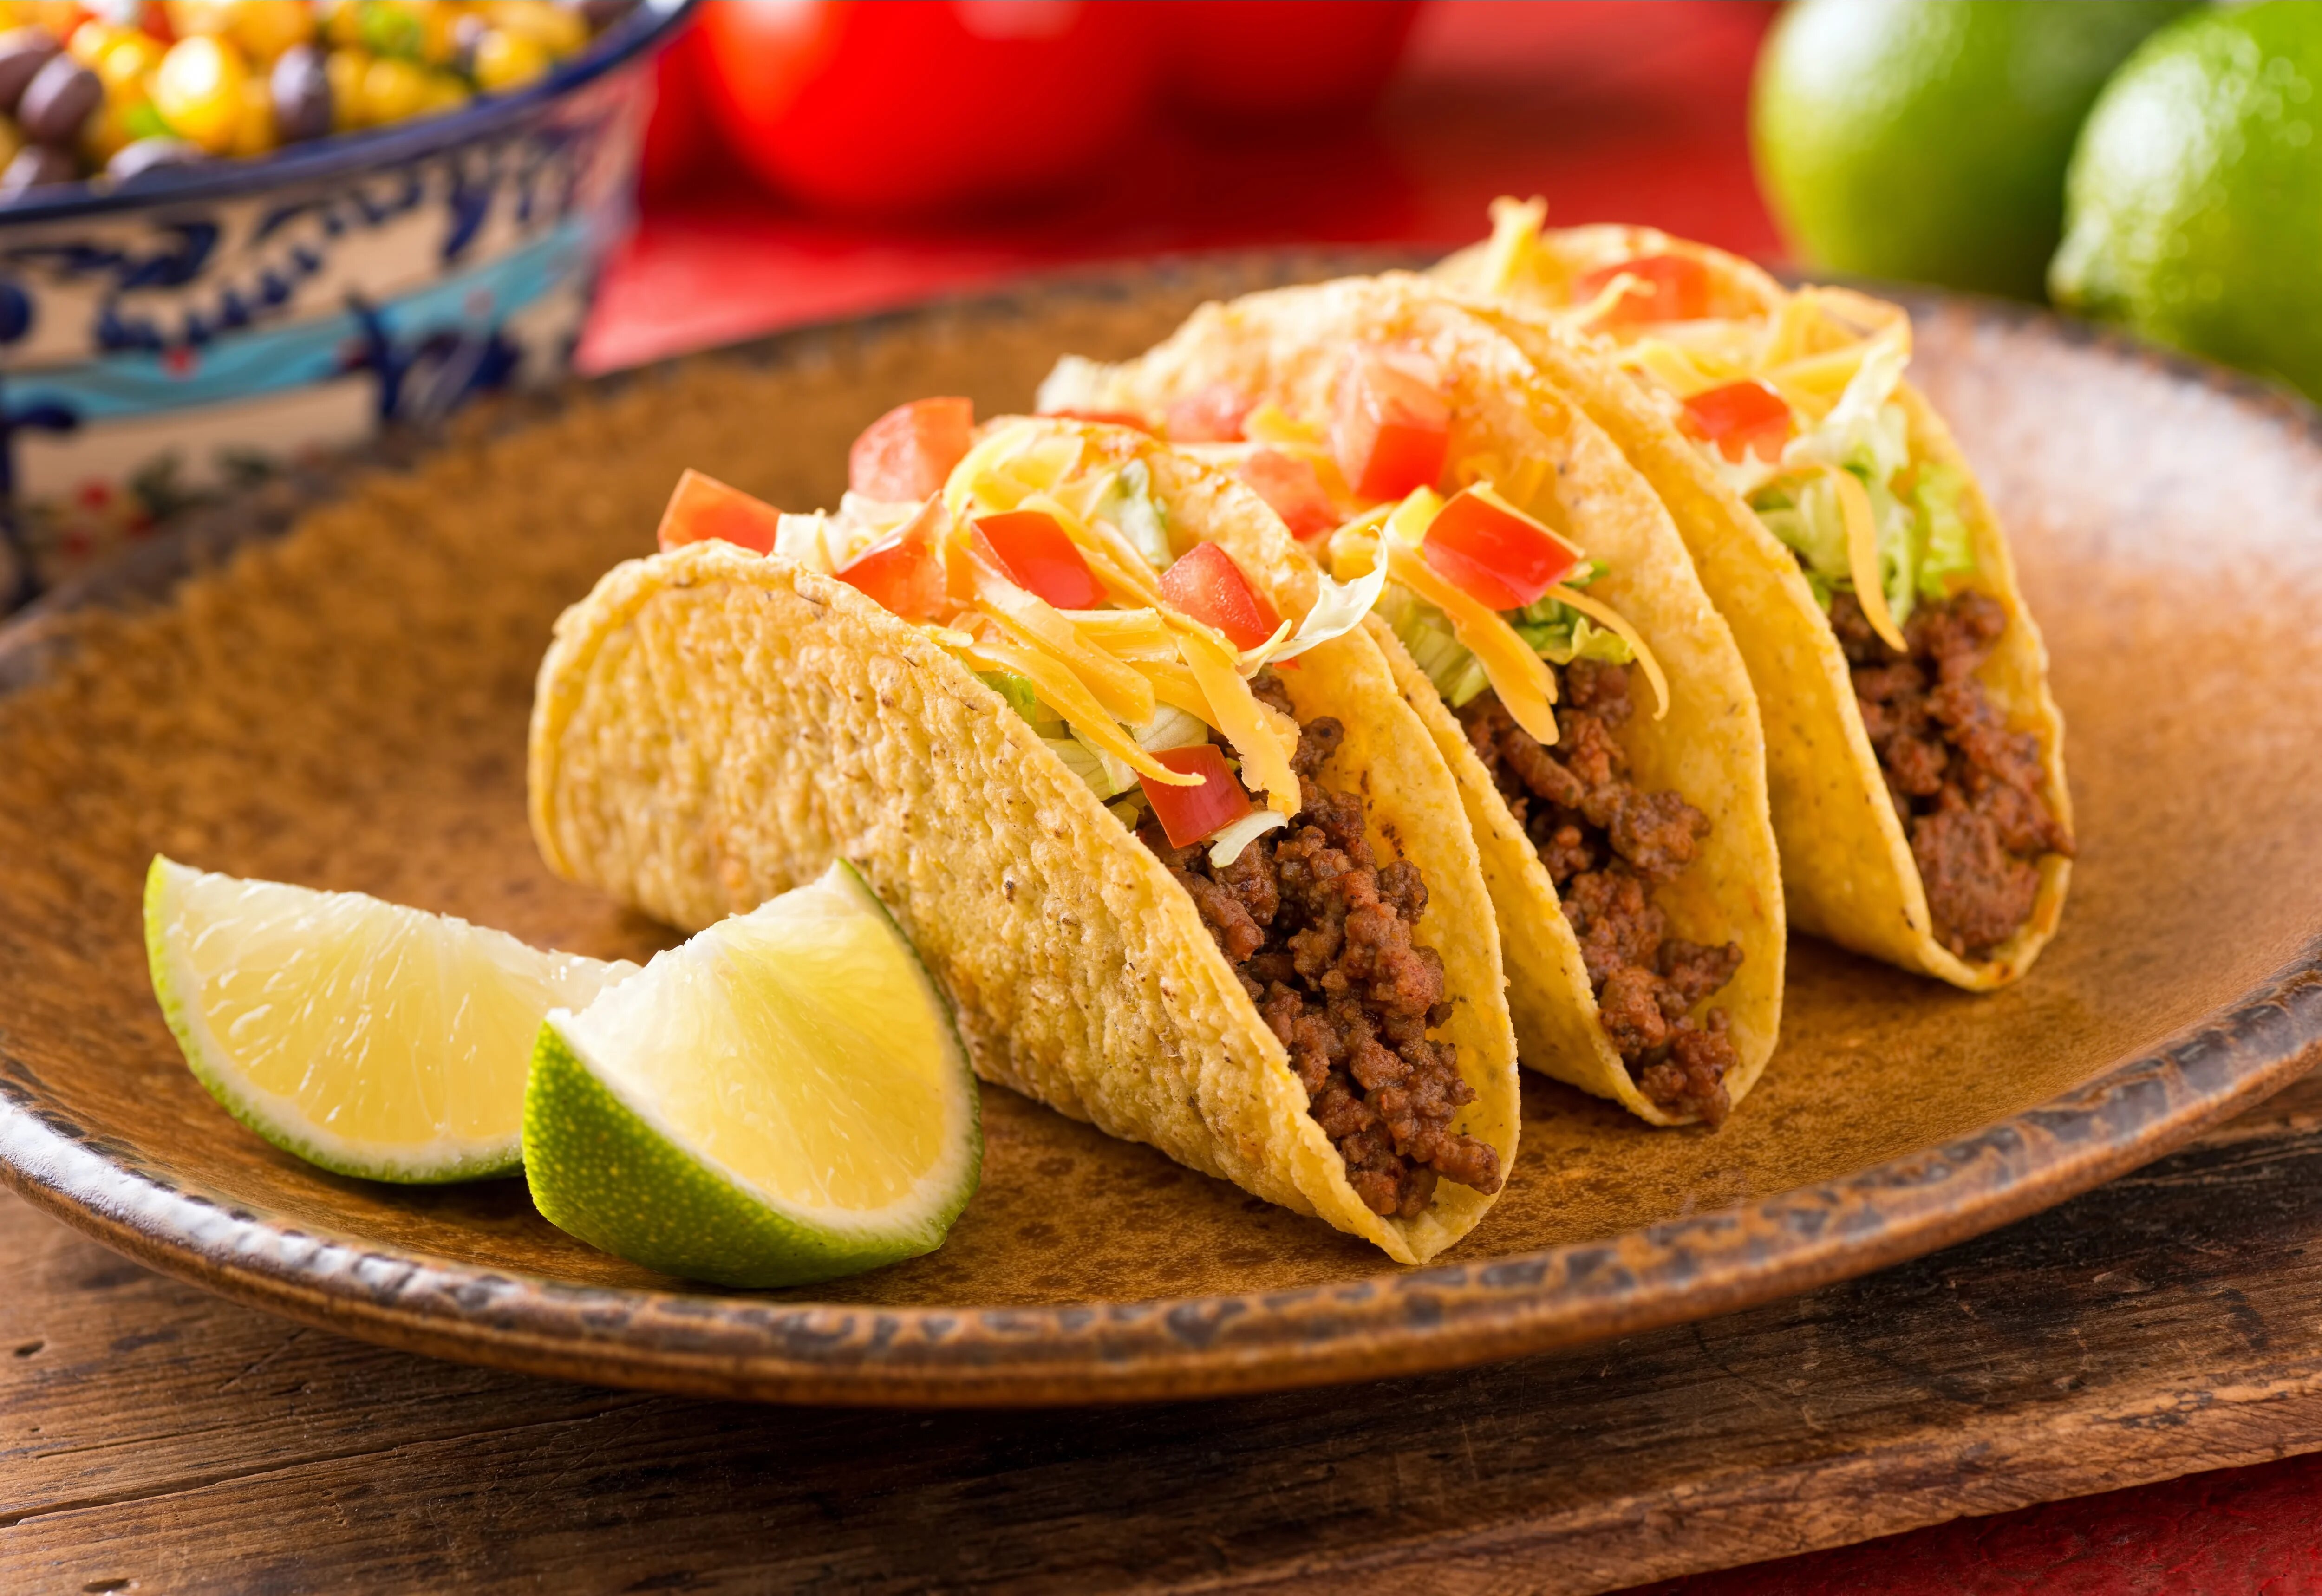 Why Tacos Are the Best: A Culinary Delight